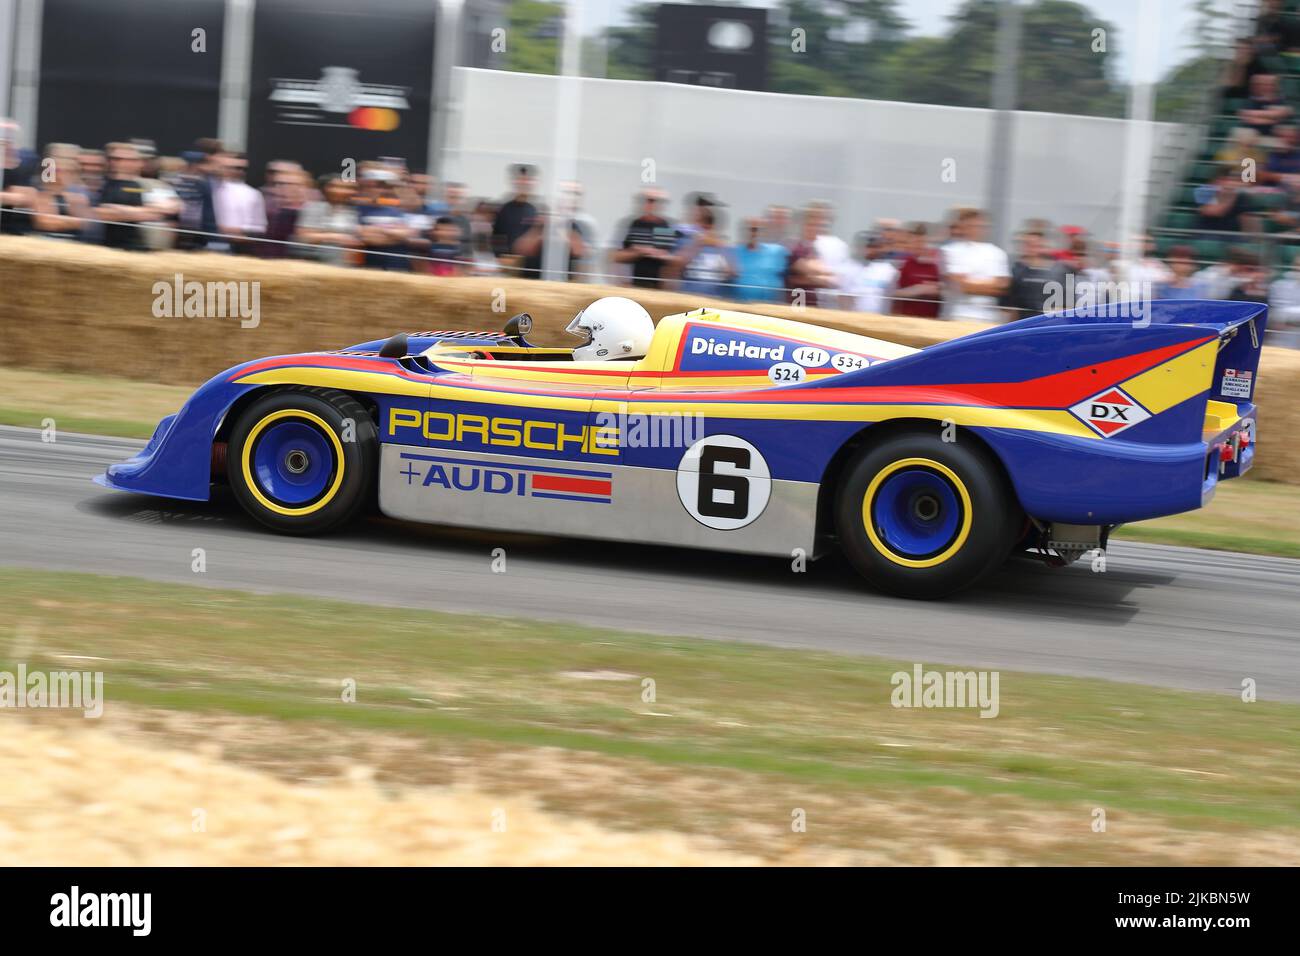 Porsche 917/10 Sunoco racing car at the Festival of Speed 2022 at Goodwood, Sussex, UK Stock Photo